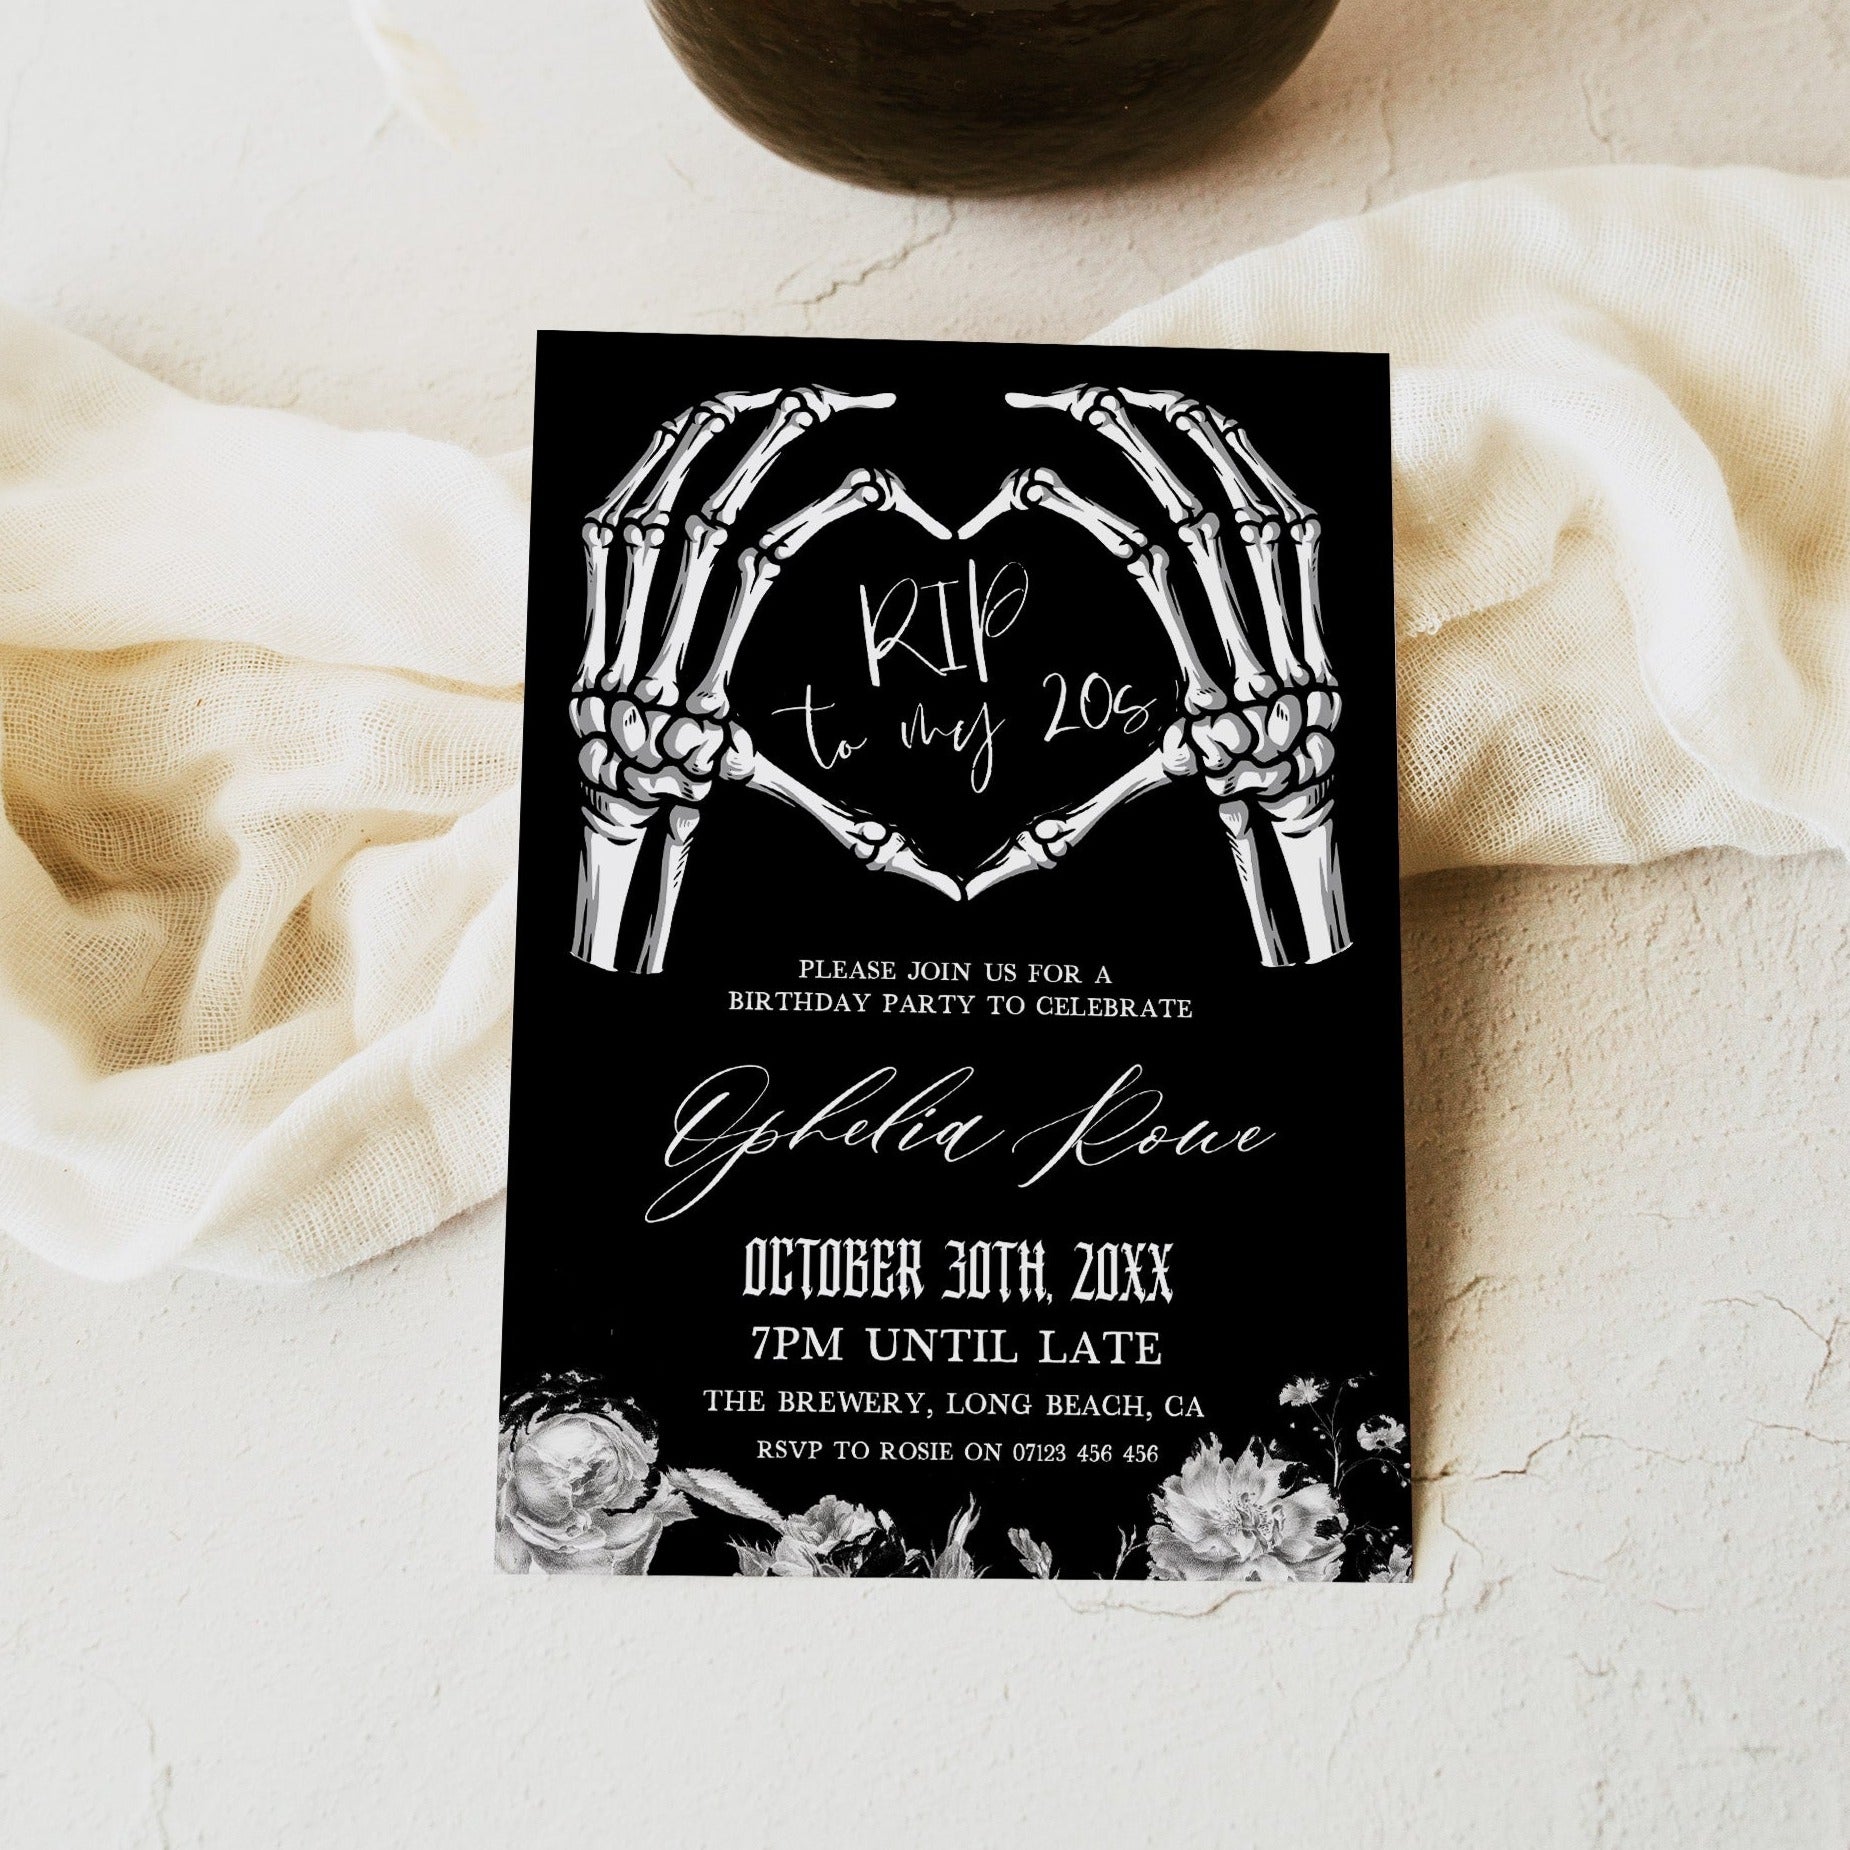 fully editable invitation and mobile invitation celebrating the death of my twenties. Gothic death to my twenties invitation suite